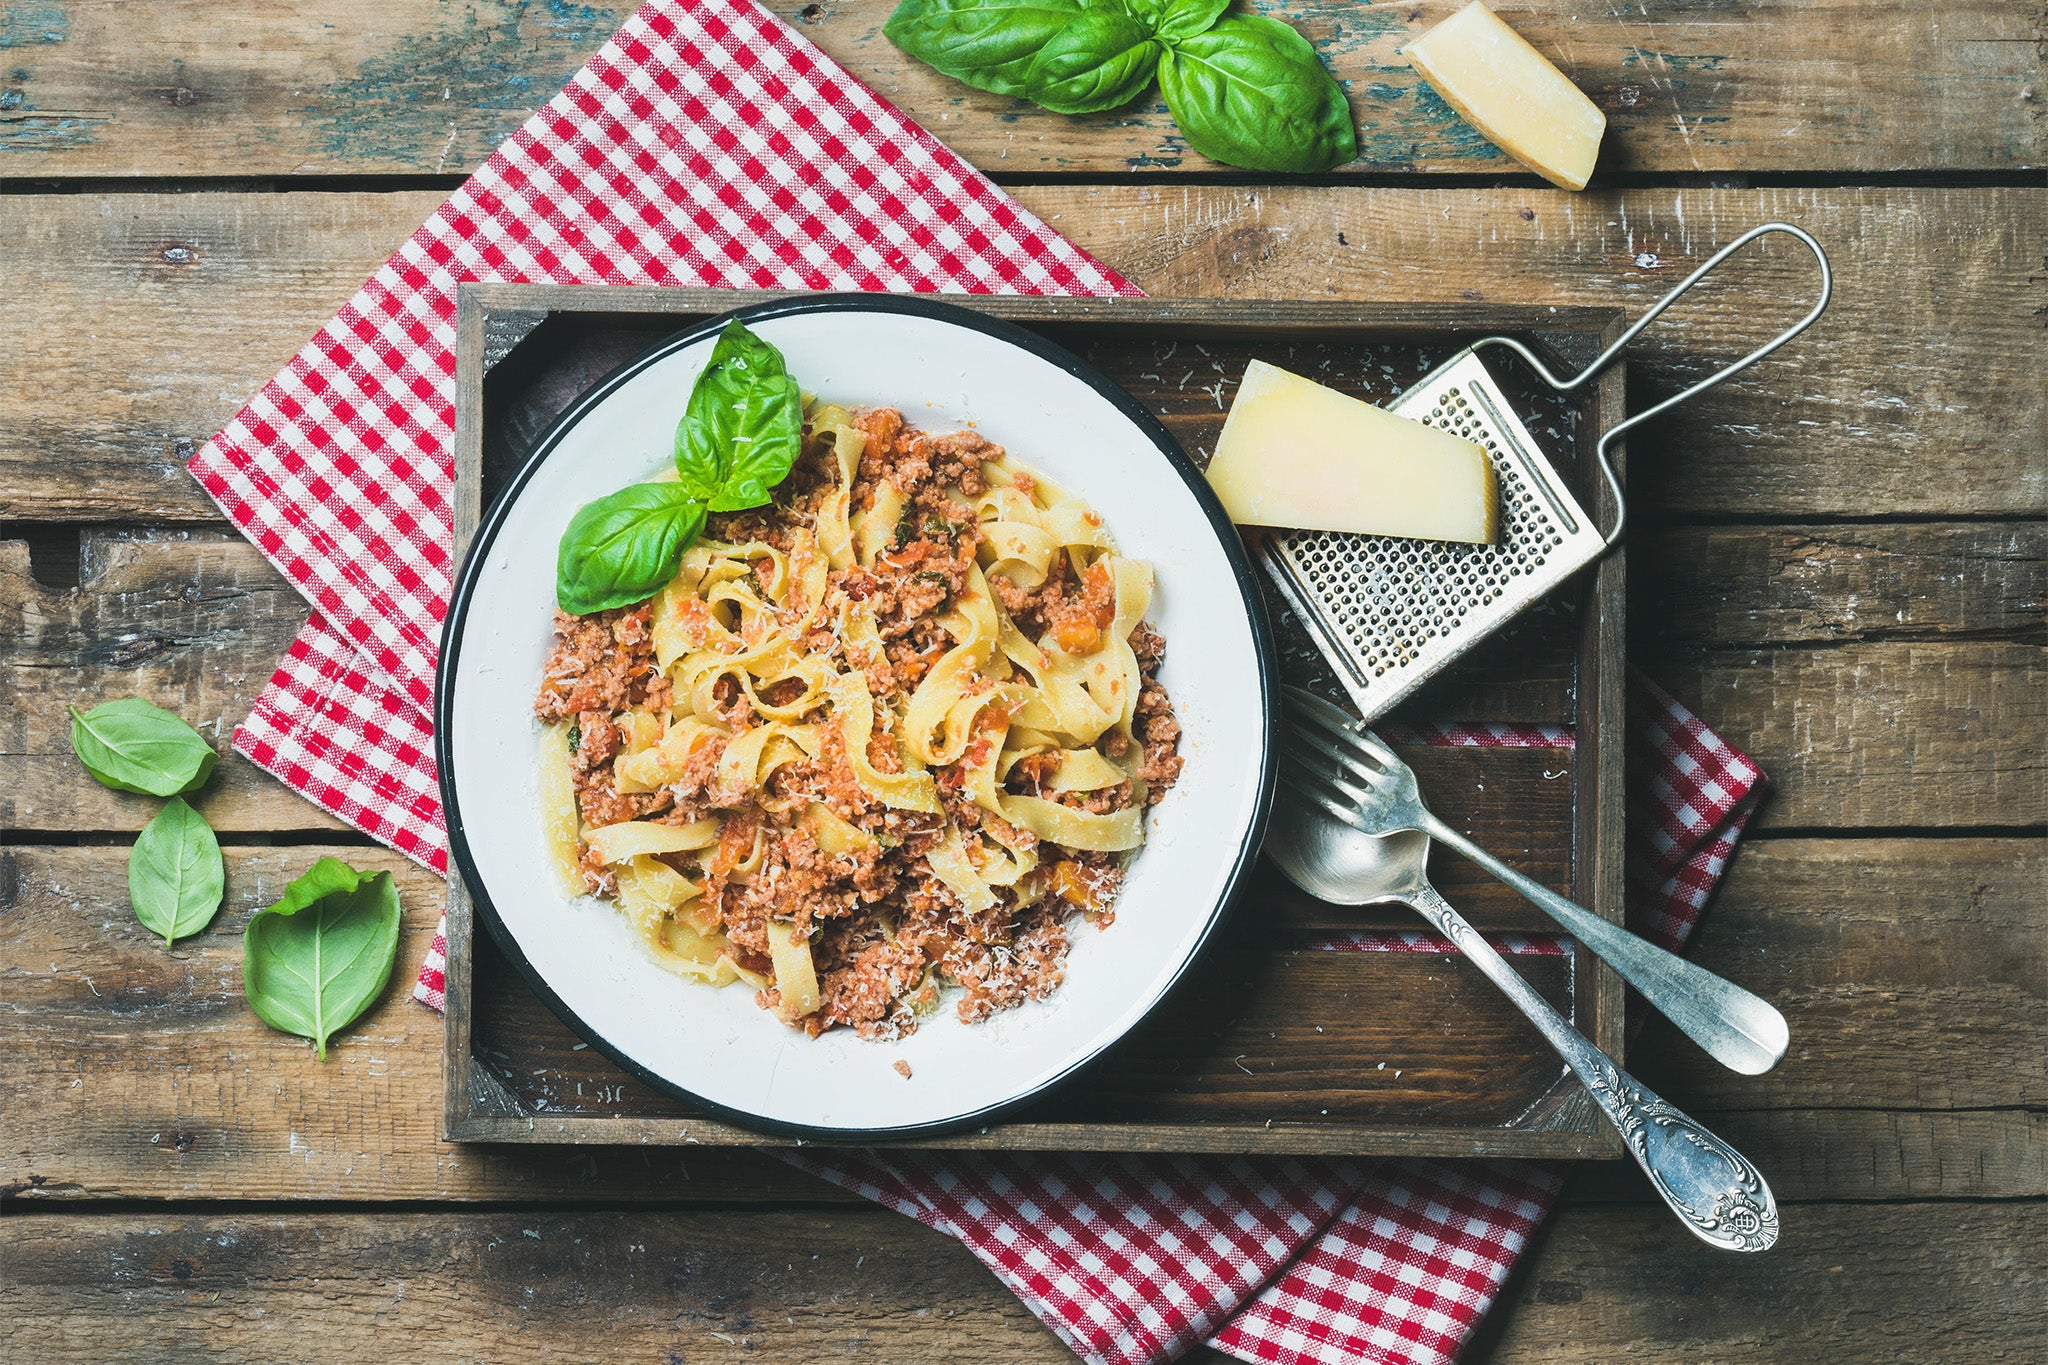 Tag bol?: Tagliatelle – not spaghetti – is the traditional pasta for bolognese